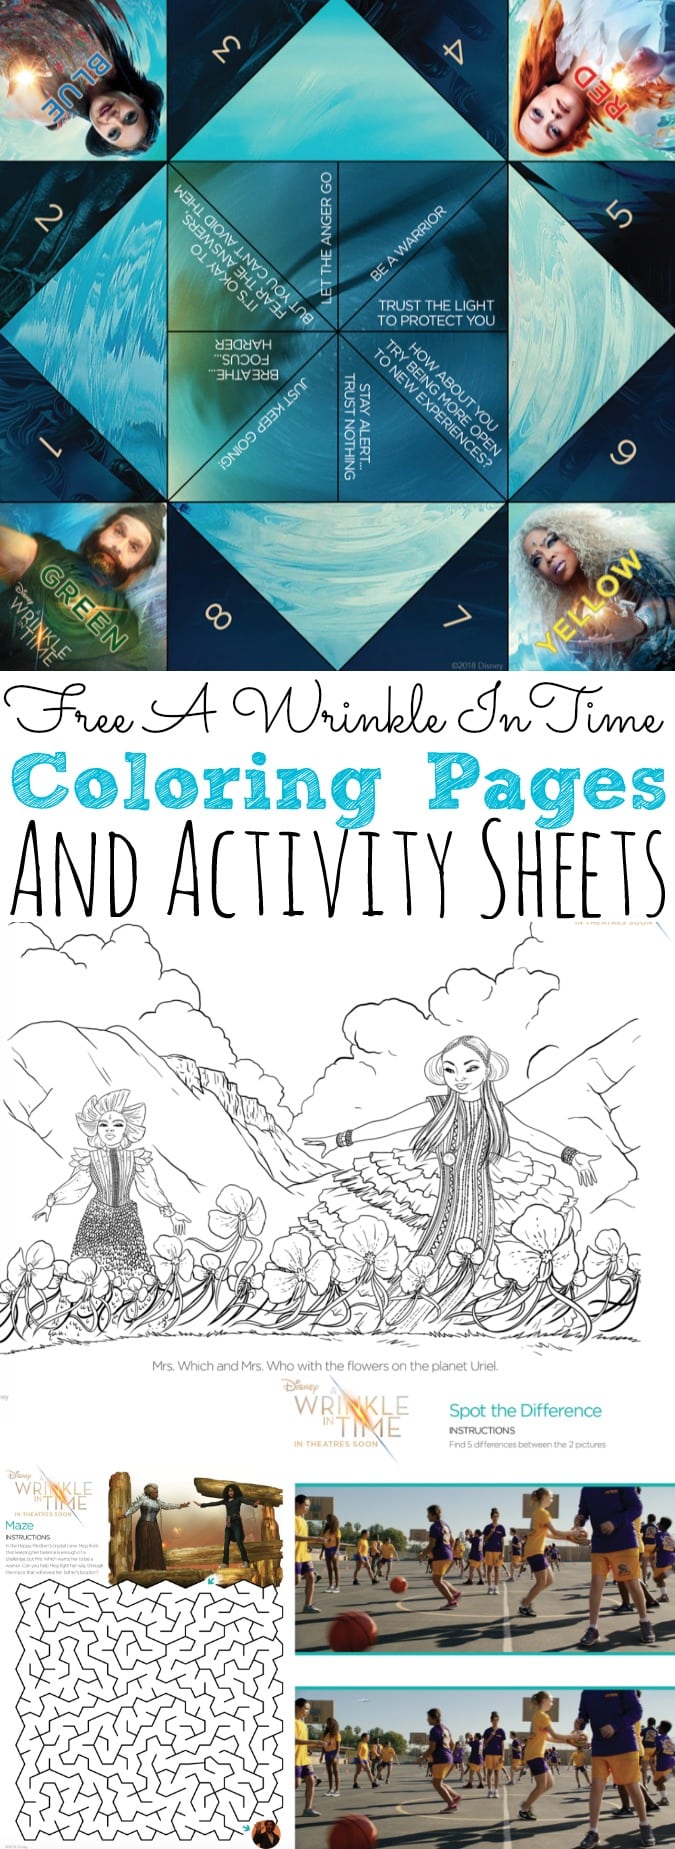 Free A Wrinkle In Time Coloring Pages and Activity Sheets